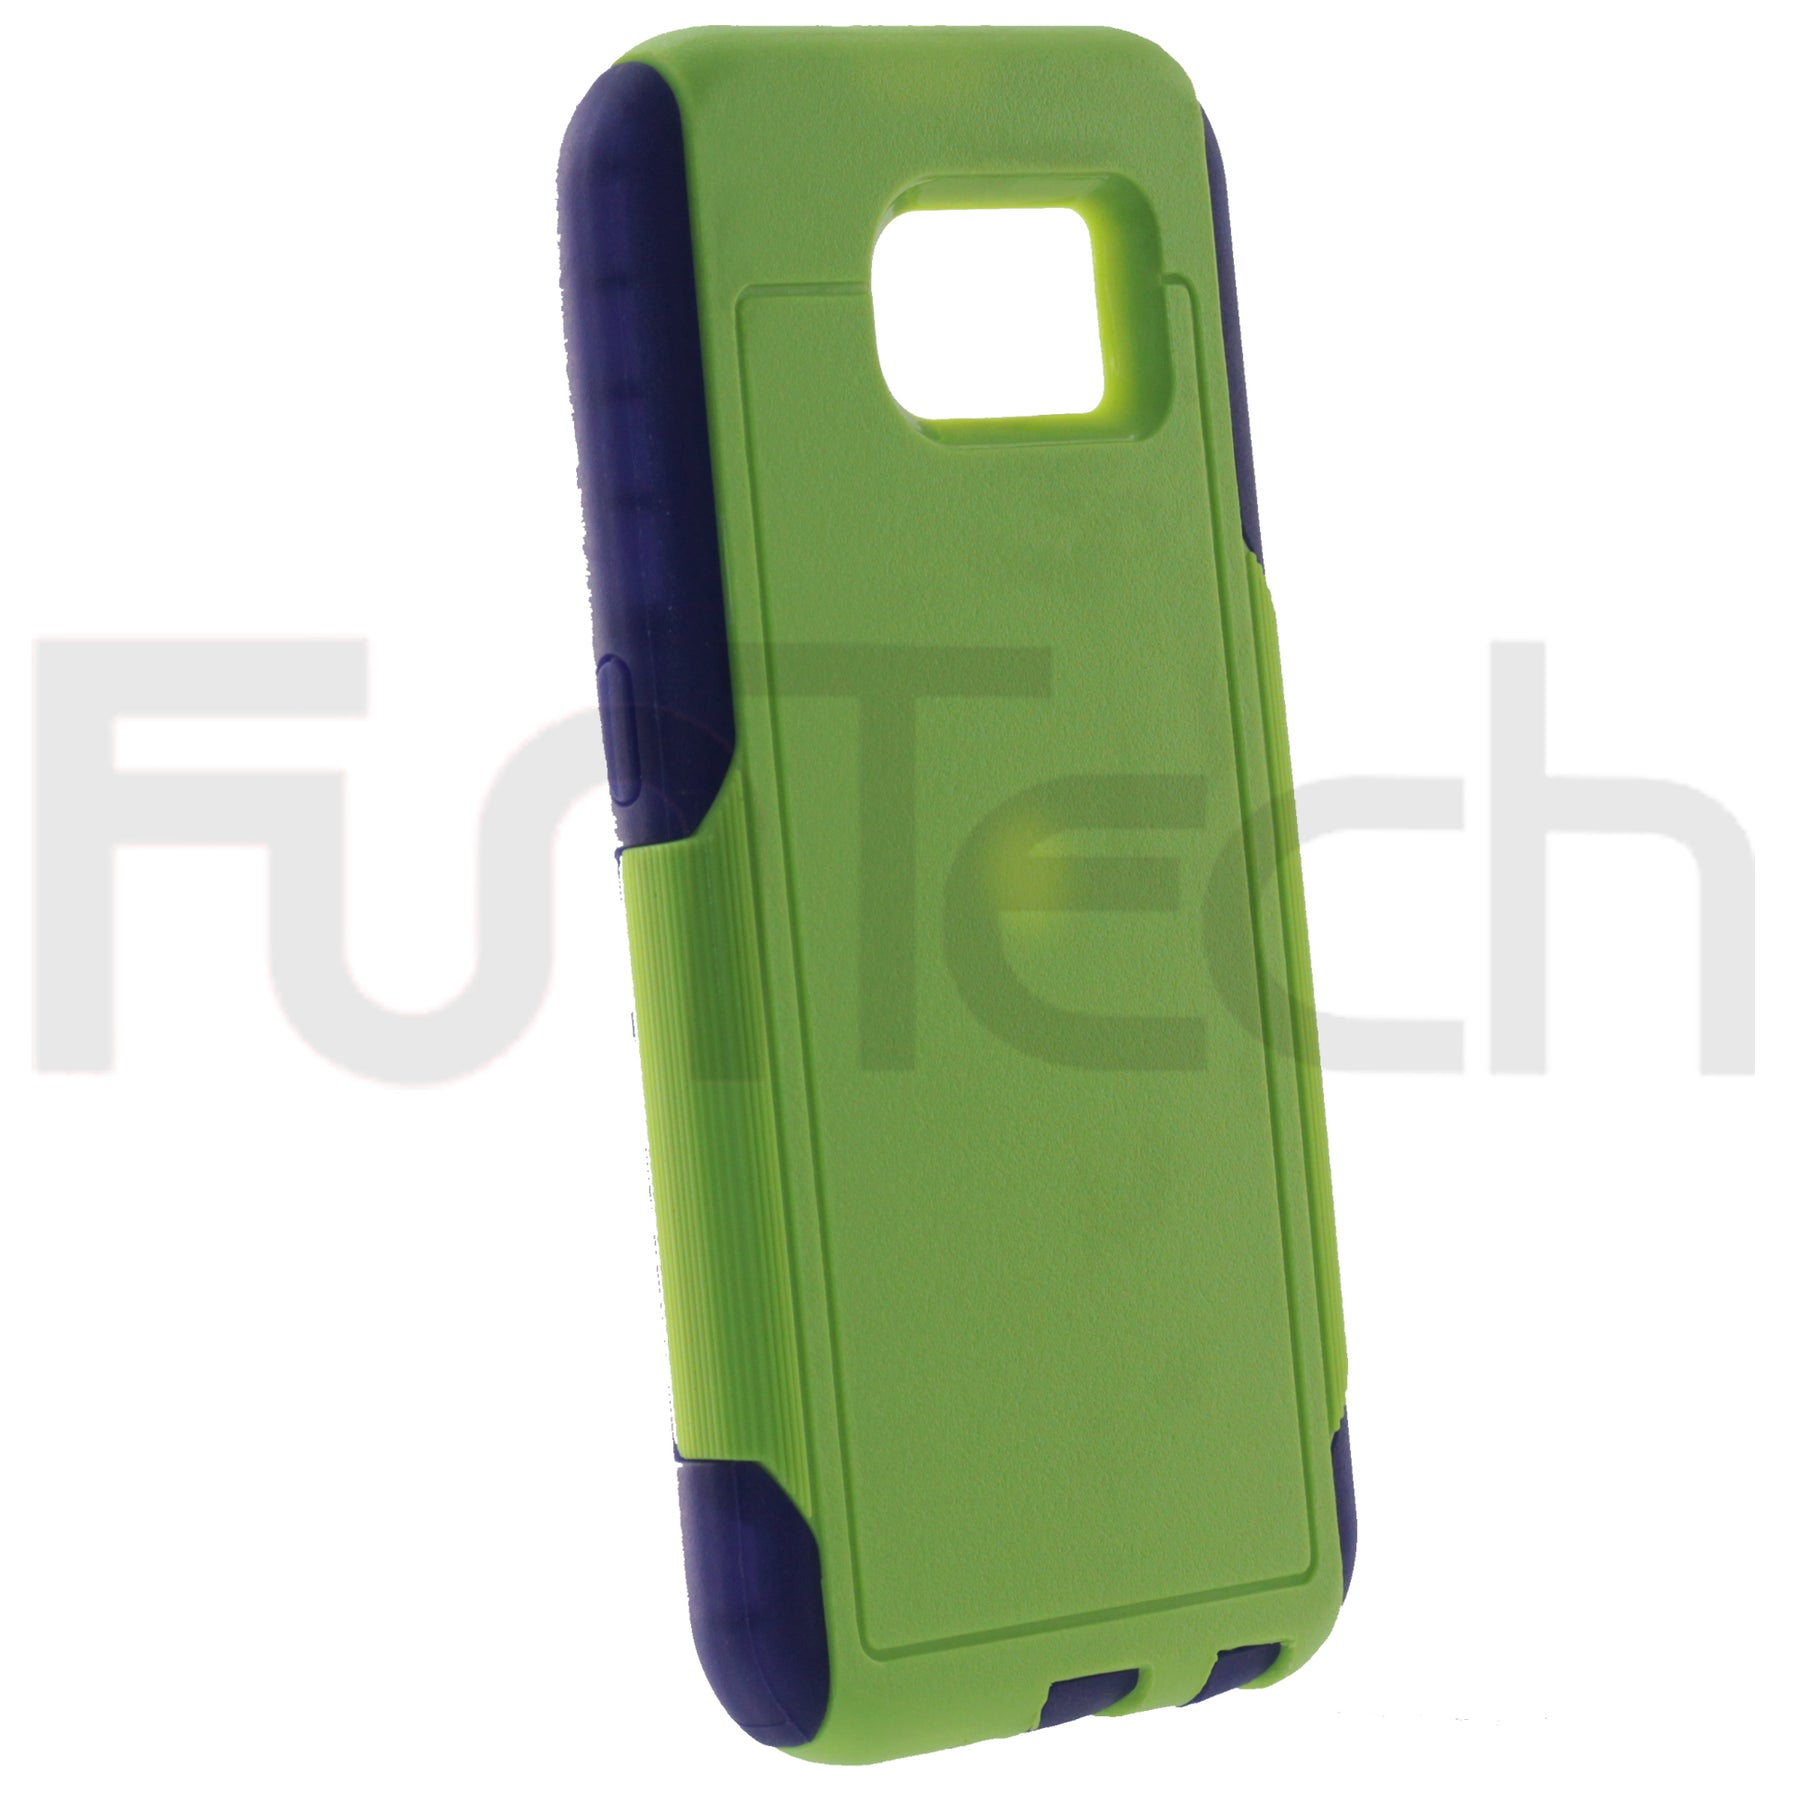 Samsung S6, Commuter Series Cover Case, Color Green.